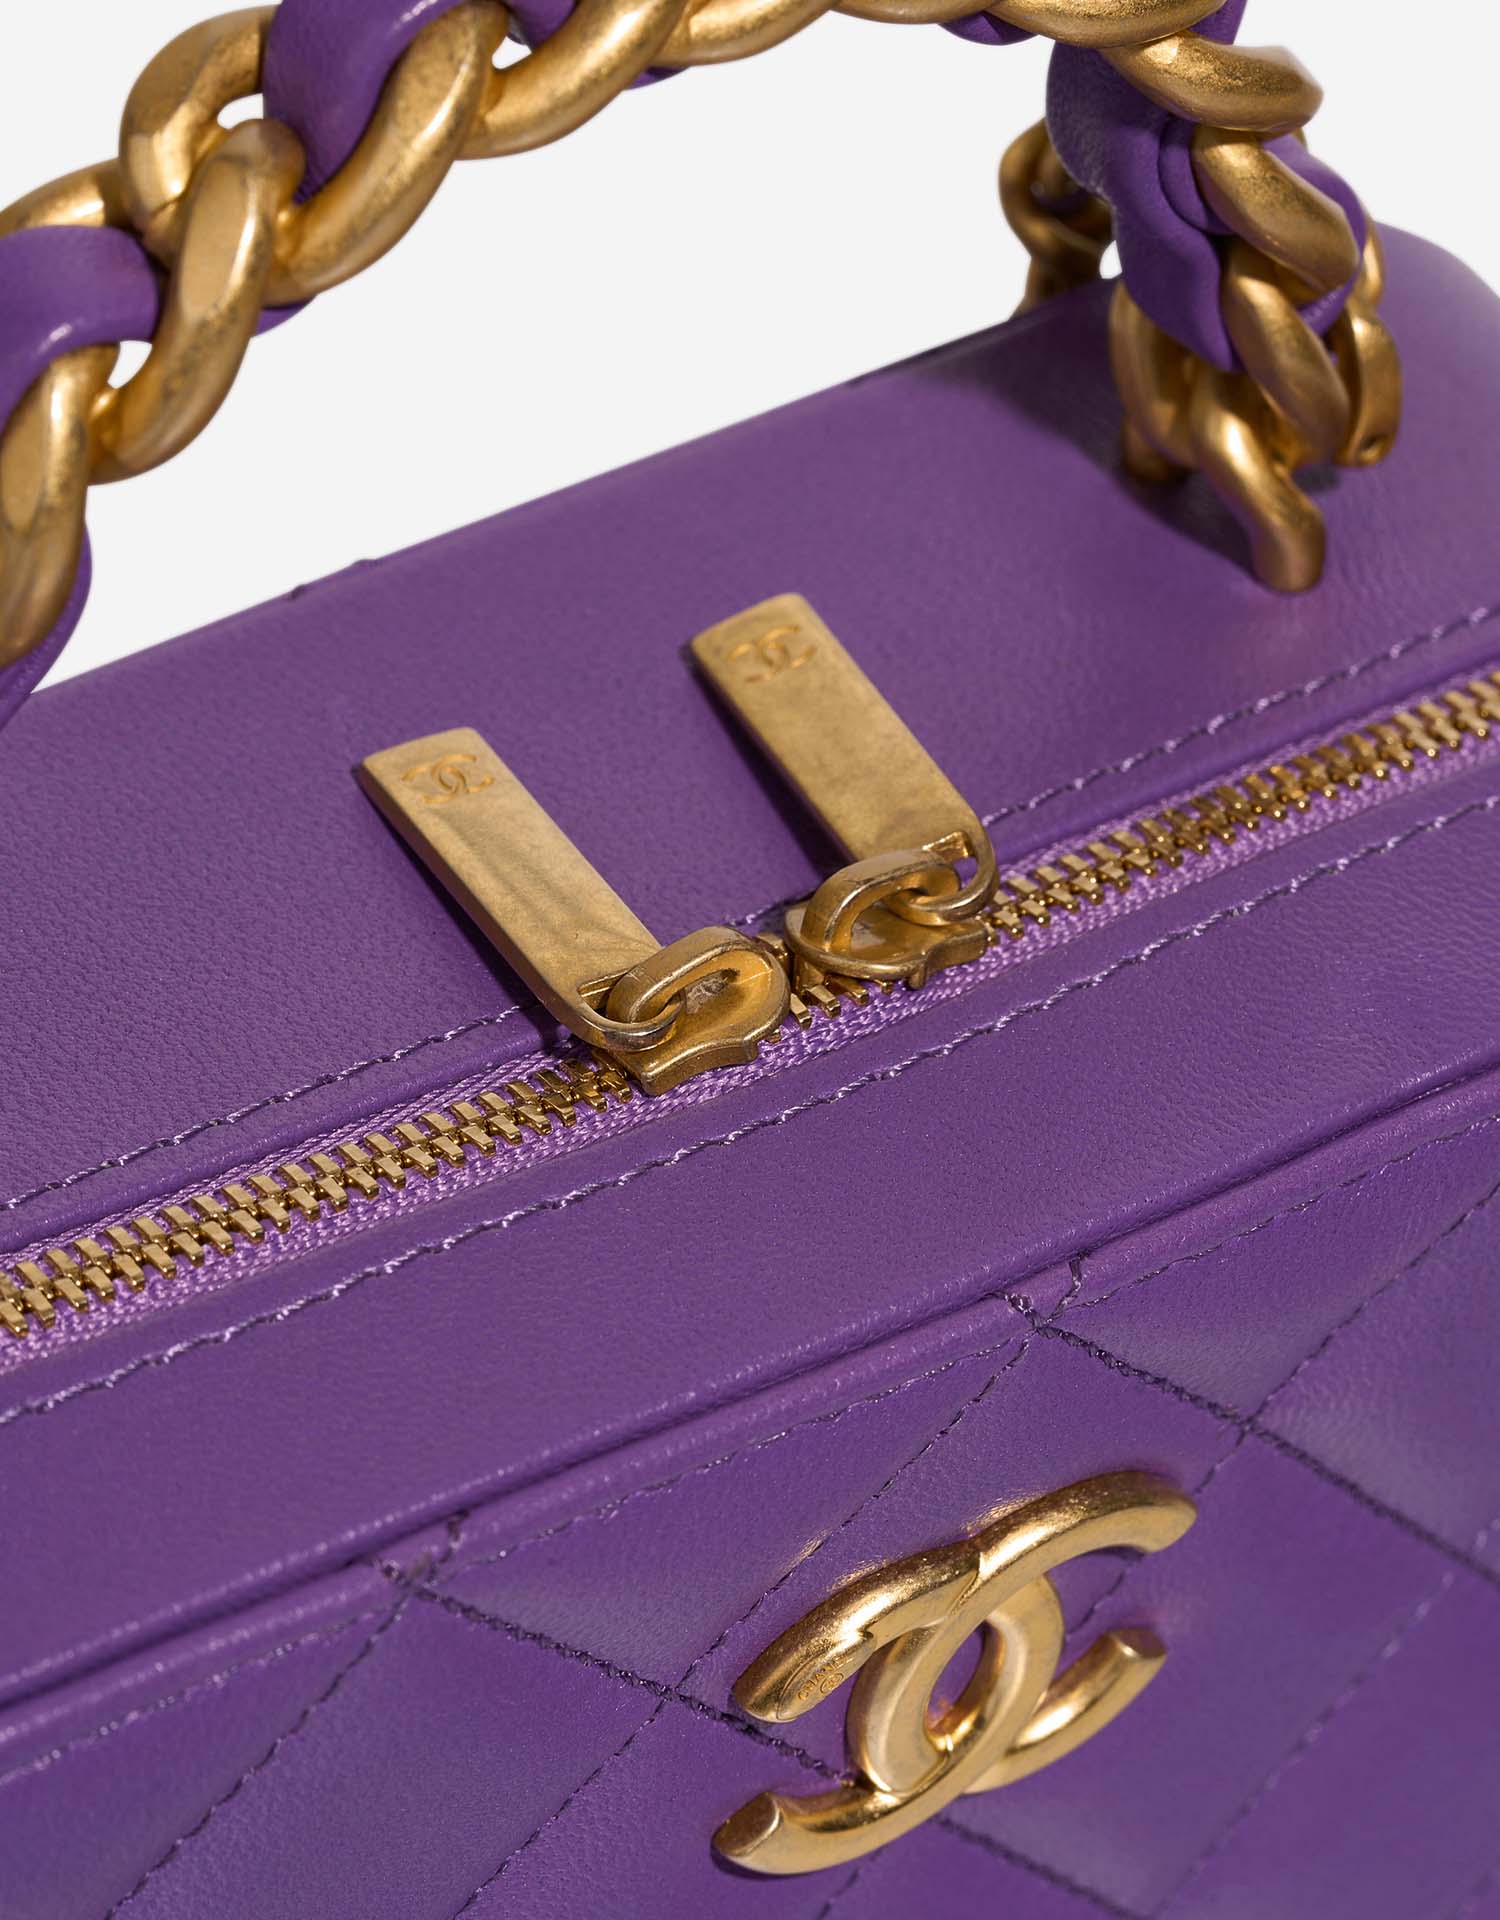 Chanel Vanity Small Violet Closing System  | Sell your designer bag on Saclab.com